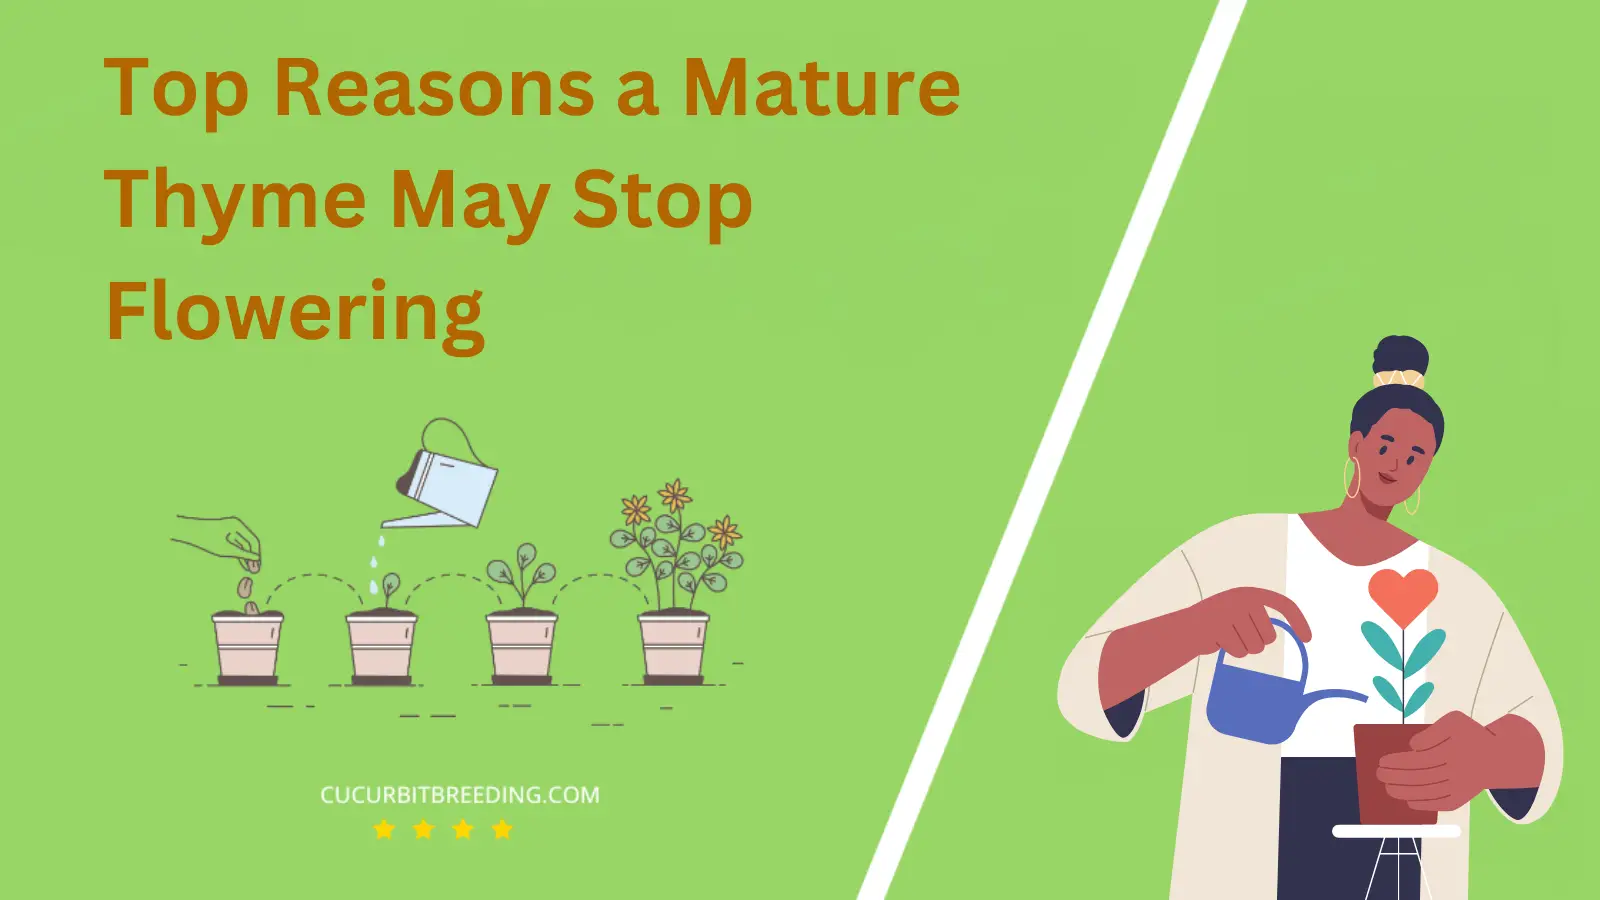 Top Reasons a Mature Thyme May Stop Flowering